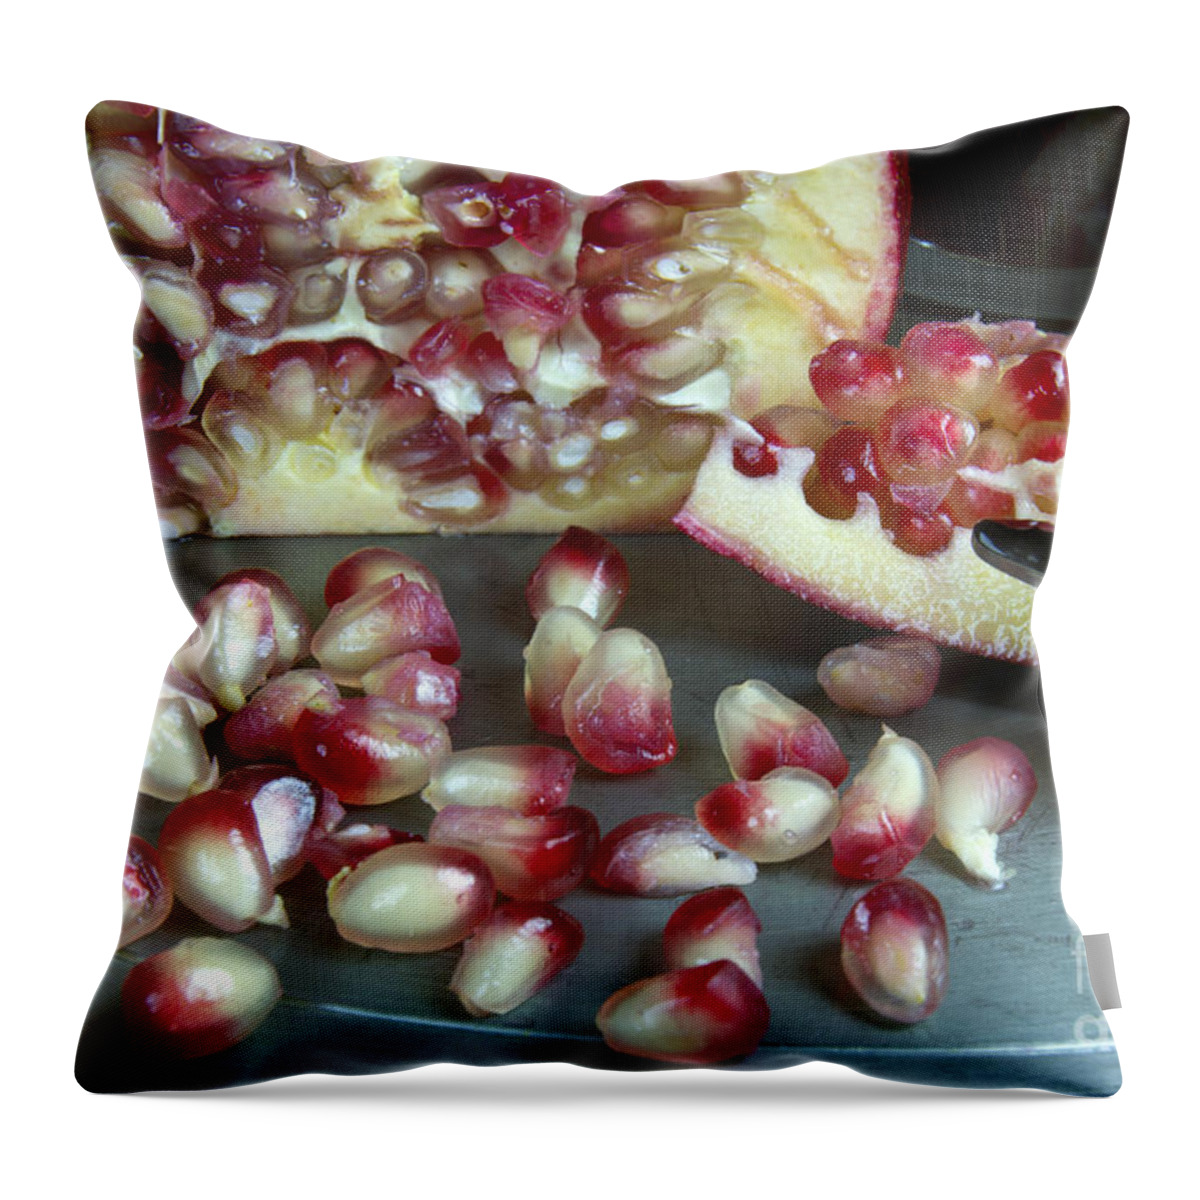 Pomegranate Throw Pillow featuring the photograph Pomegranate Seeds by Karen Foley